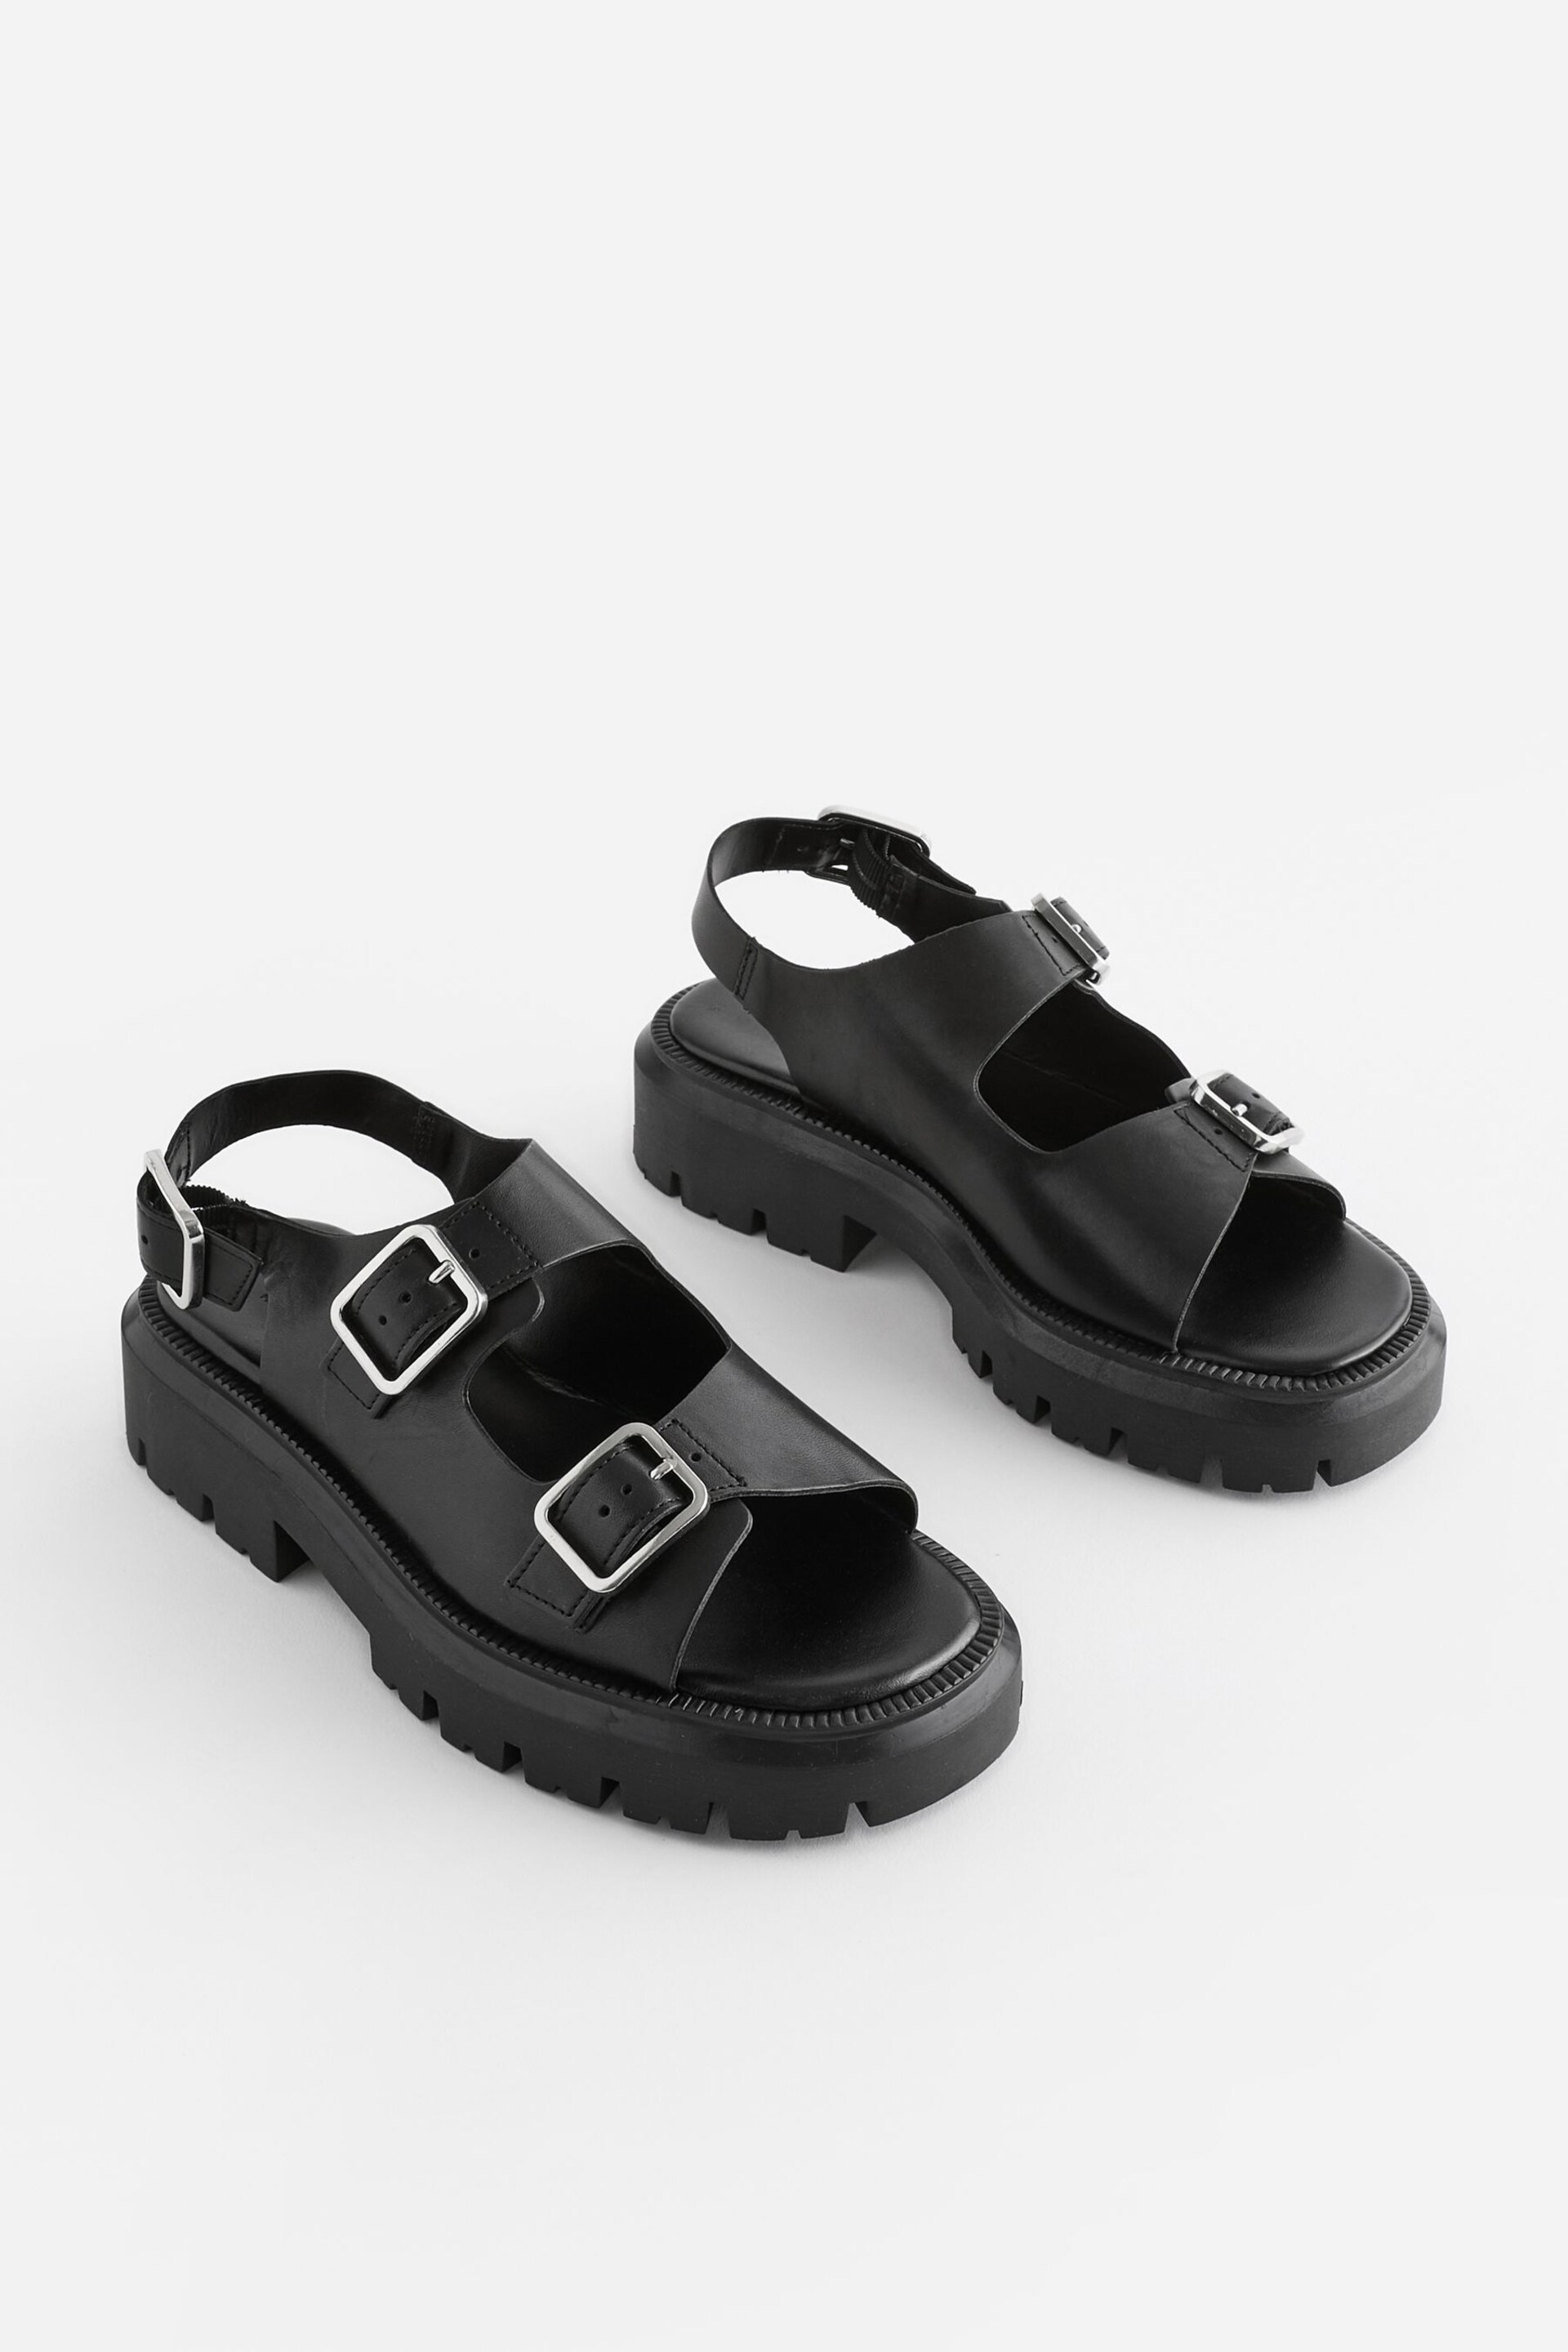 Black Regular/Wide Fit Premium Leather Chunky Cleated Sandals - Image 1 of 8